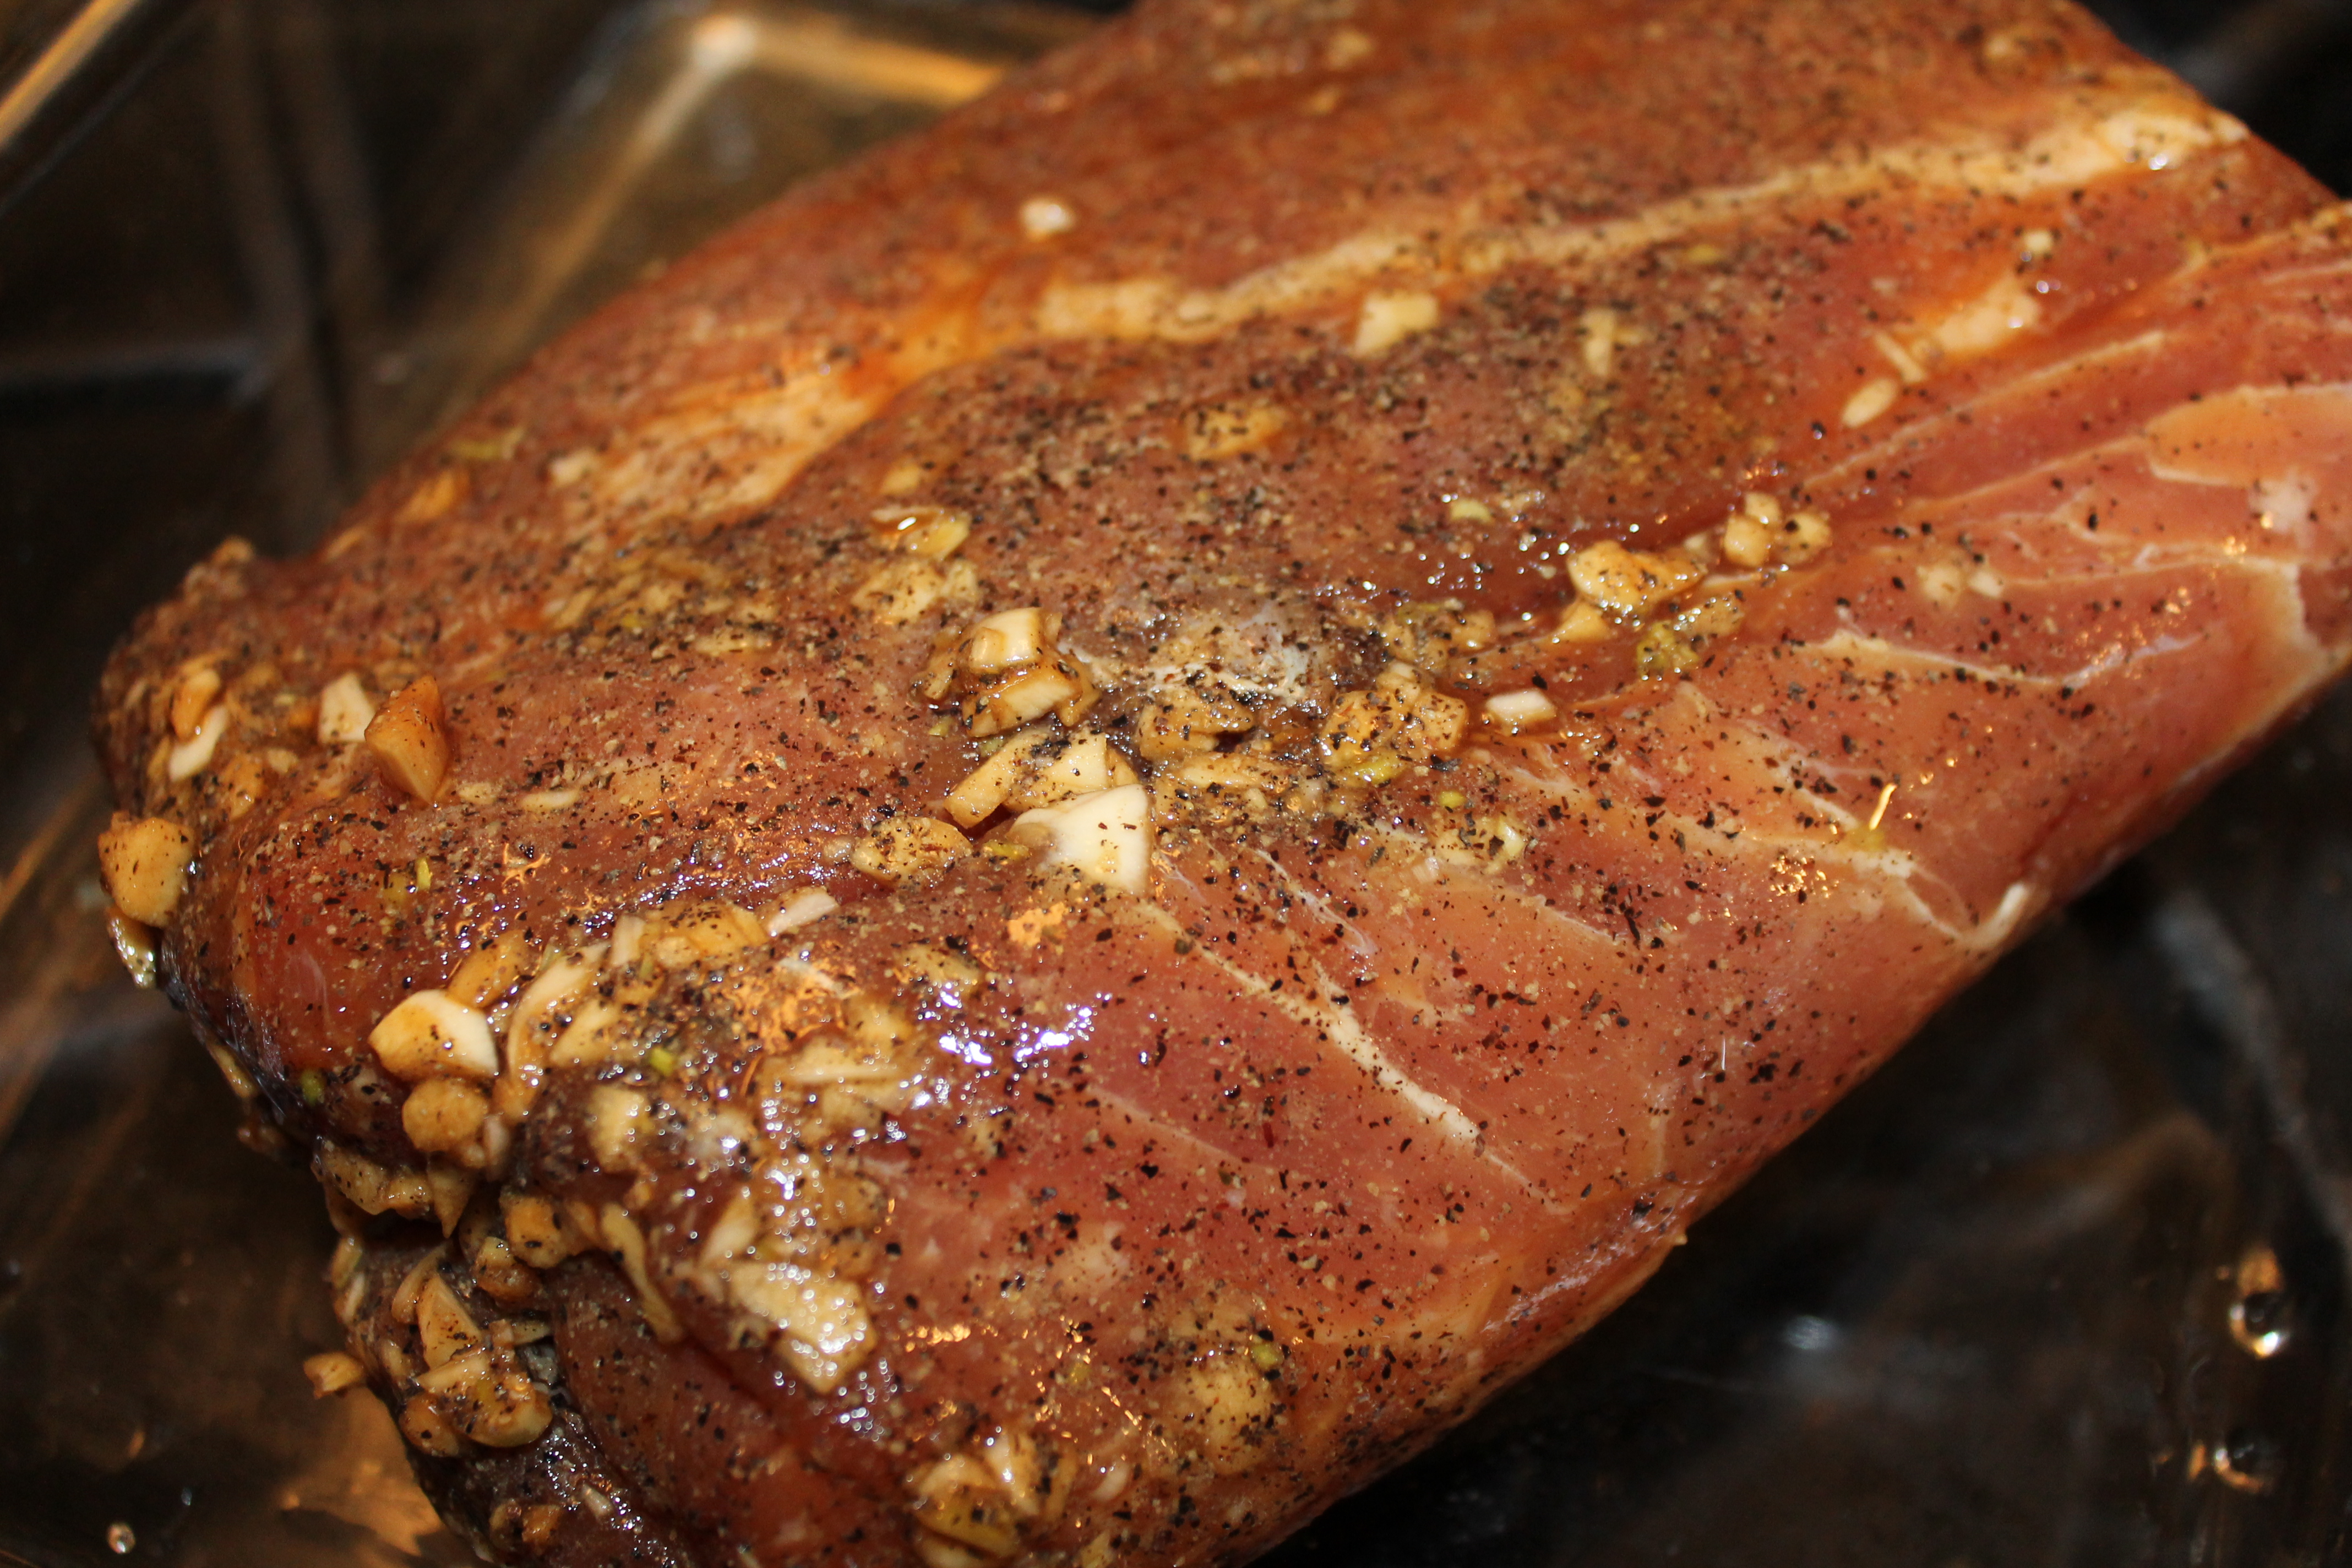 A pork loin, trimmed, seasoned, and ready to crust